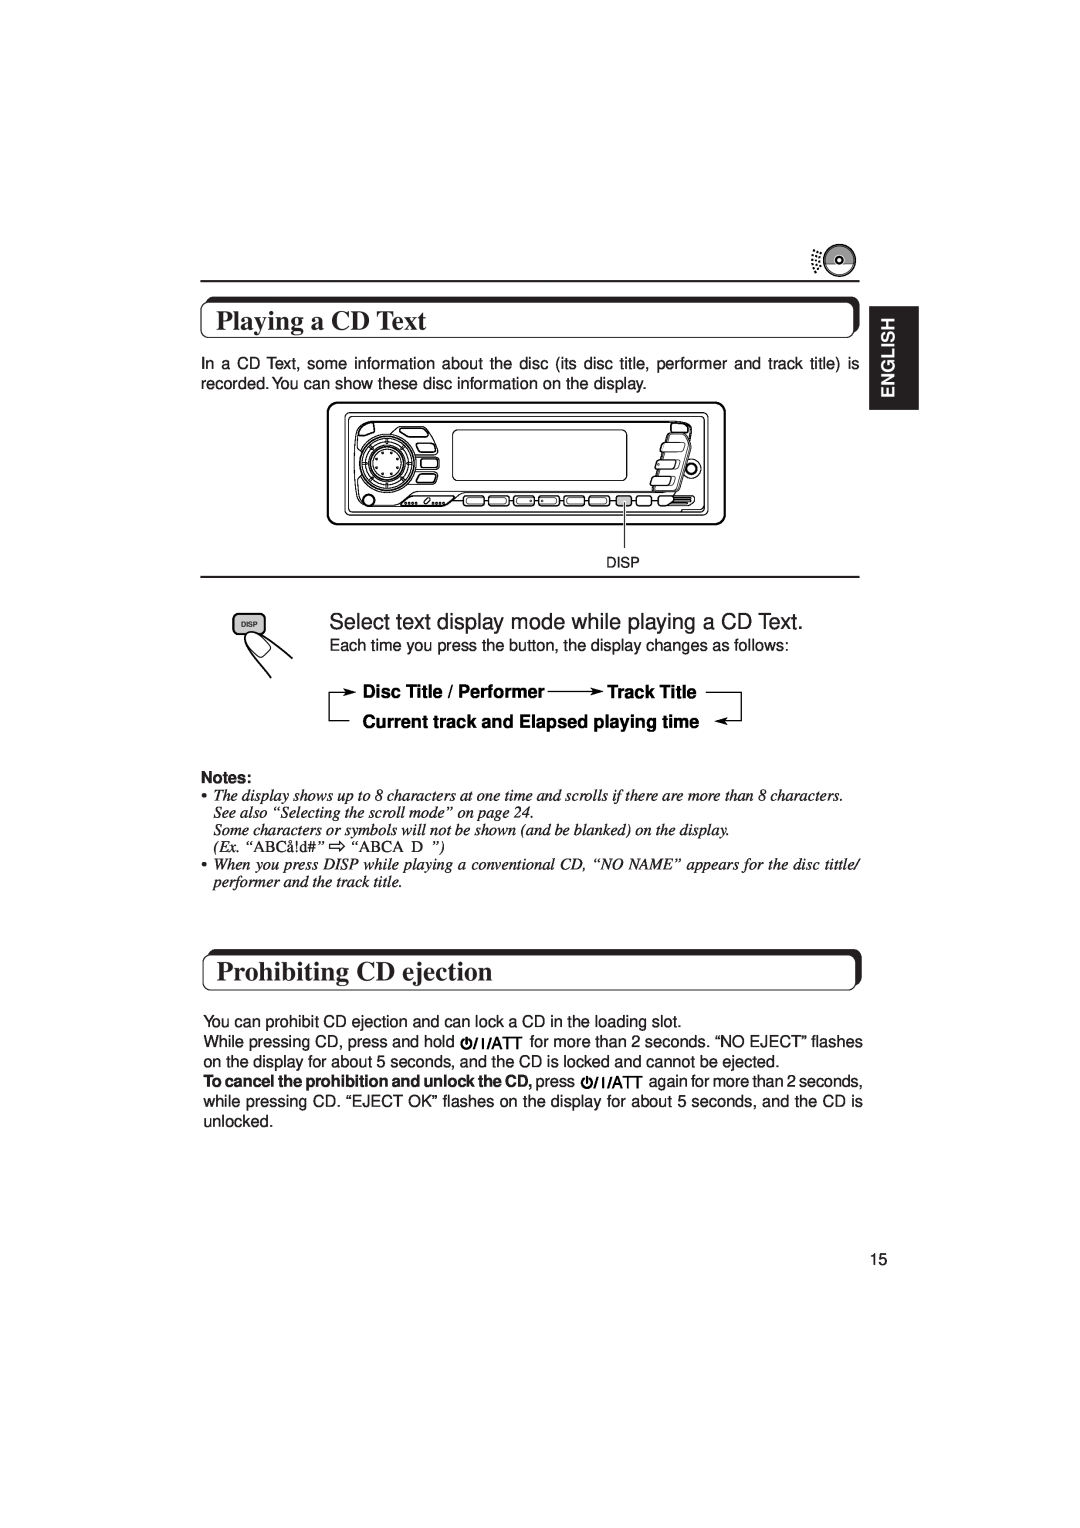 JVC KD-SX940, KD-SX949 manual Playing a CD Text, Prohibiting CD ejection, English, Disc Title / Performer Track Title 